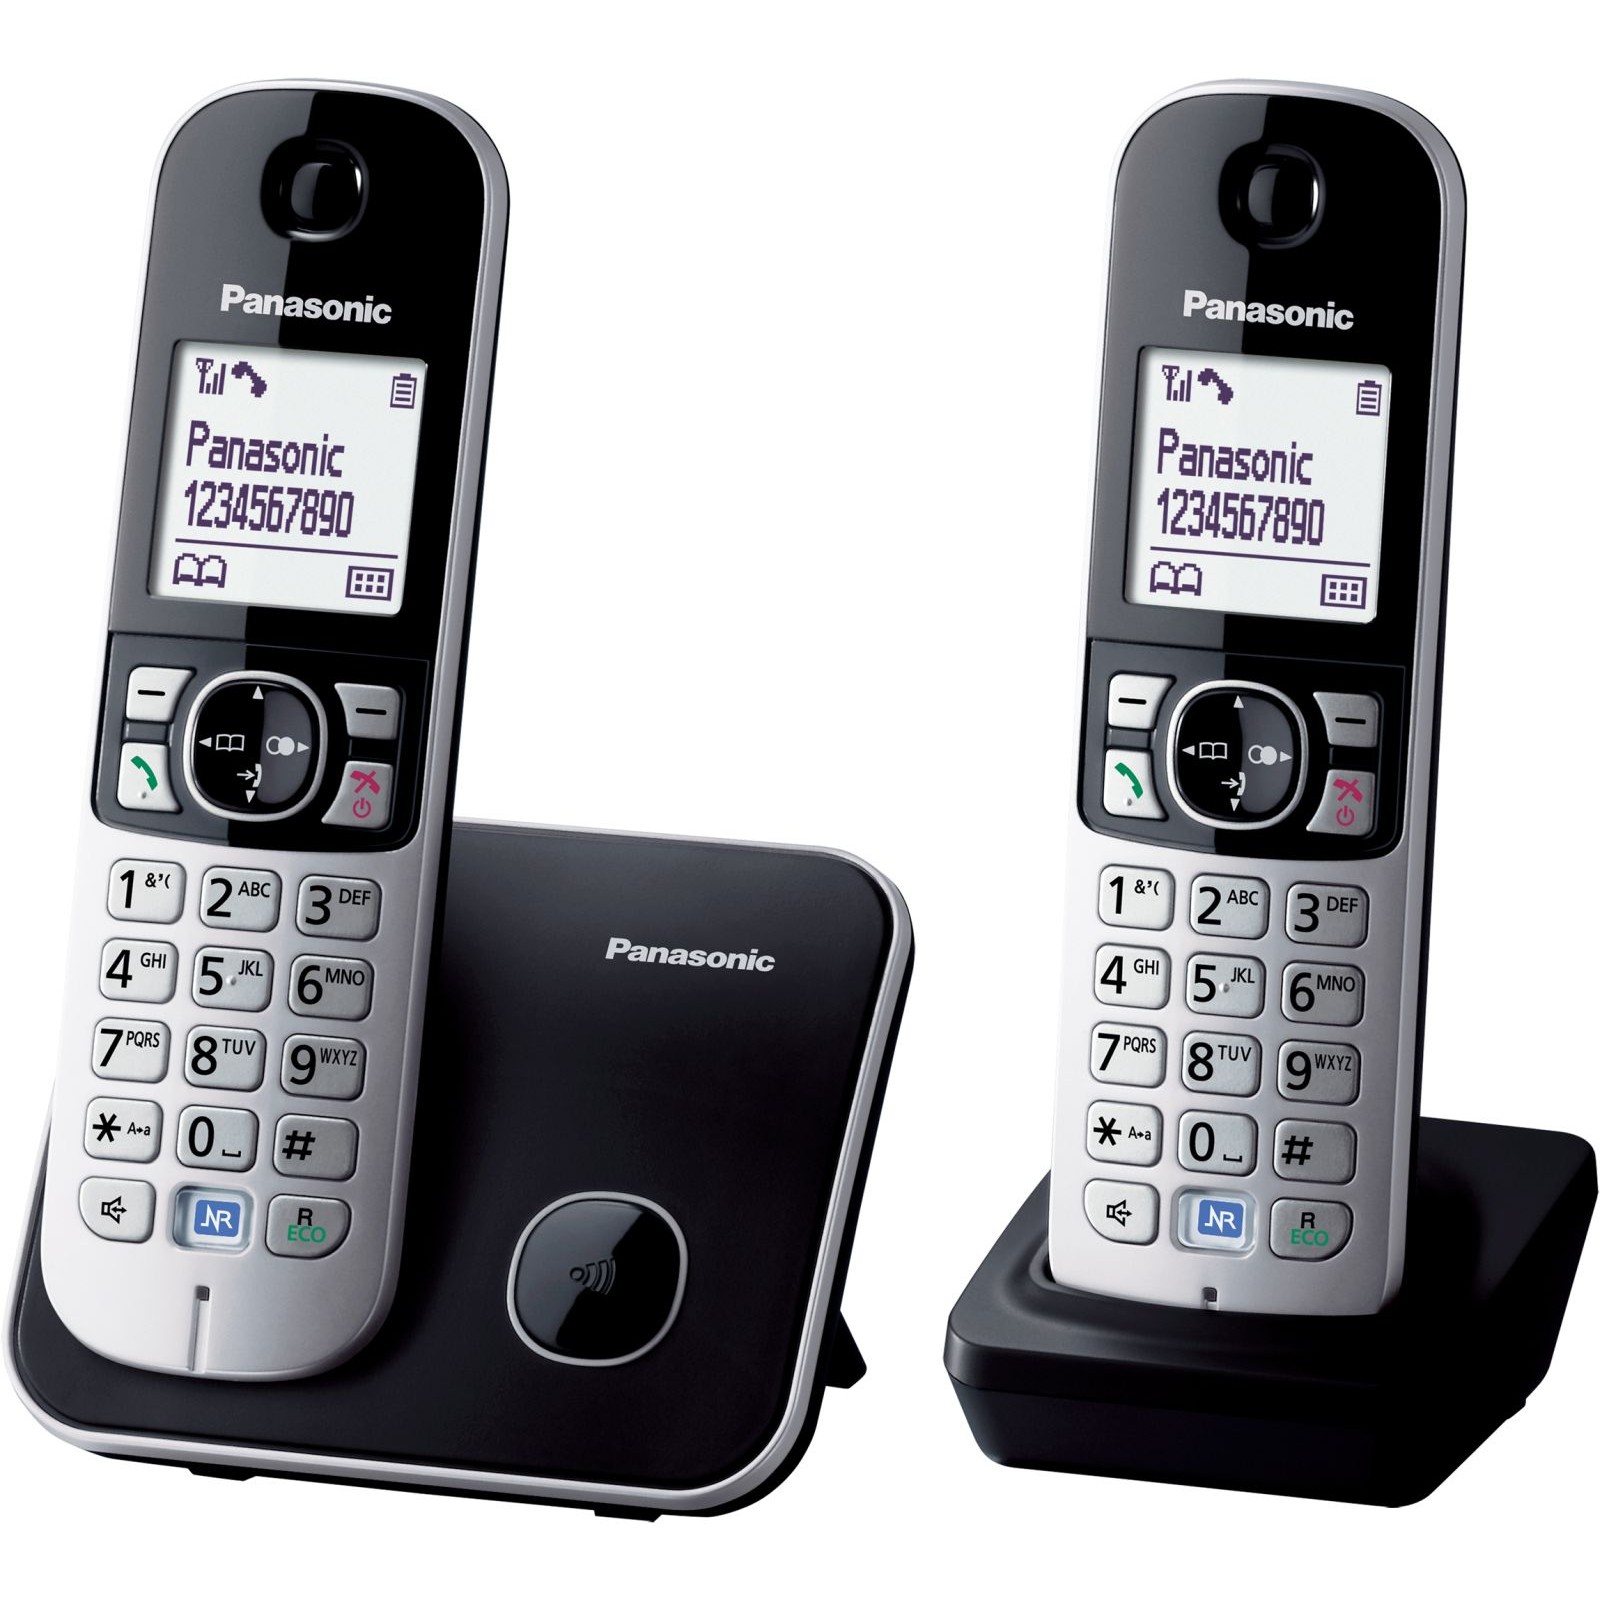 DUO DECT PHONE